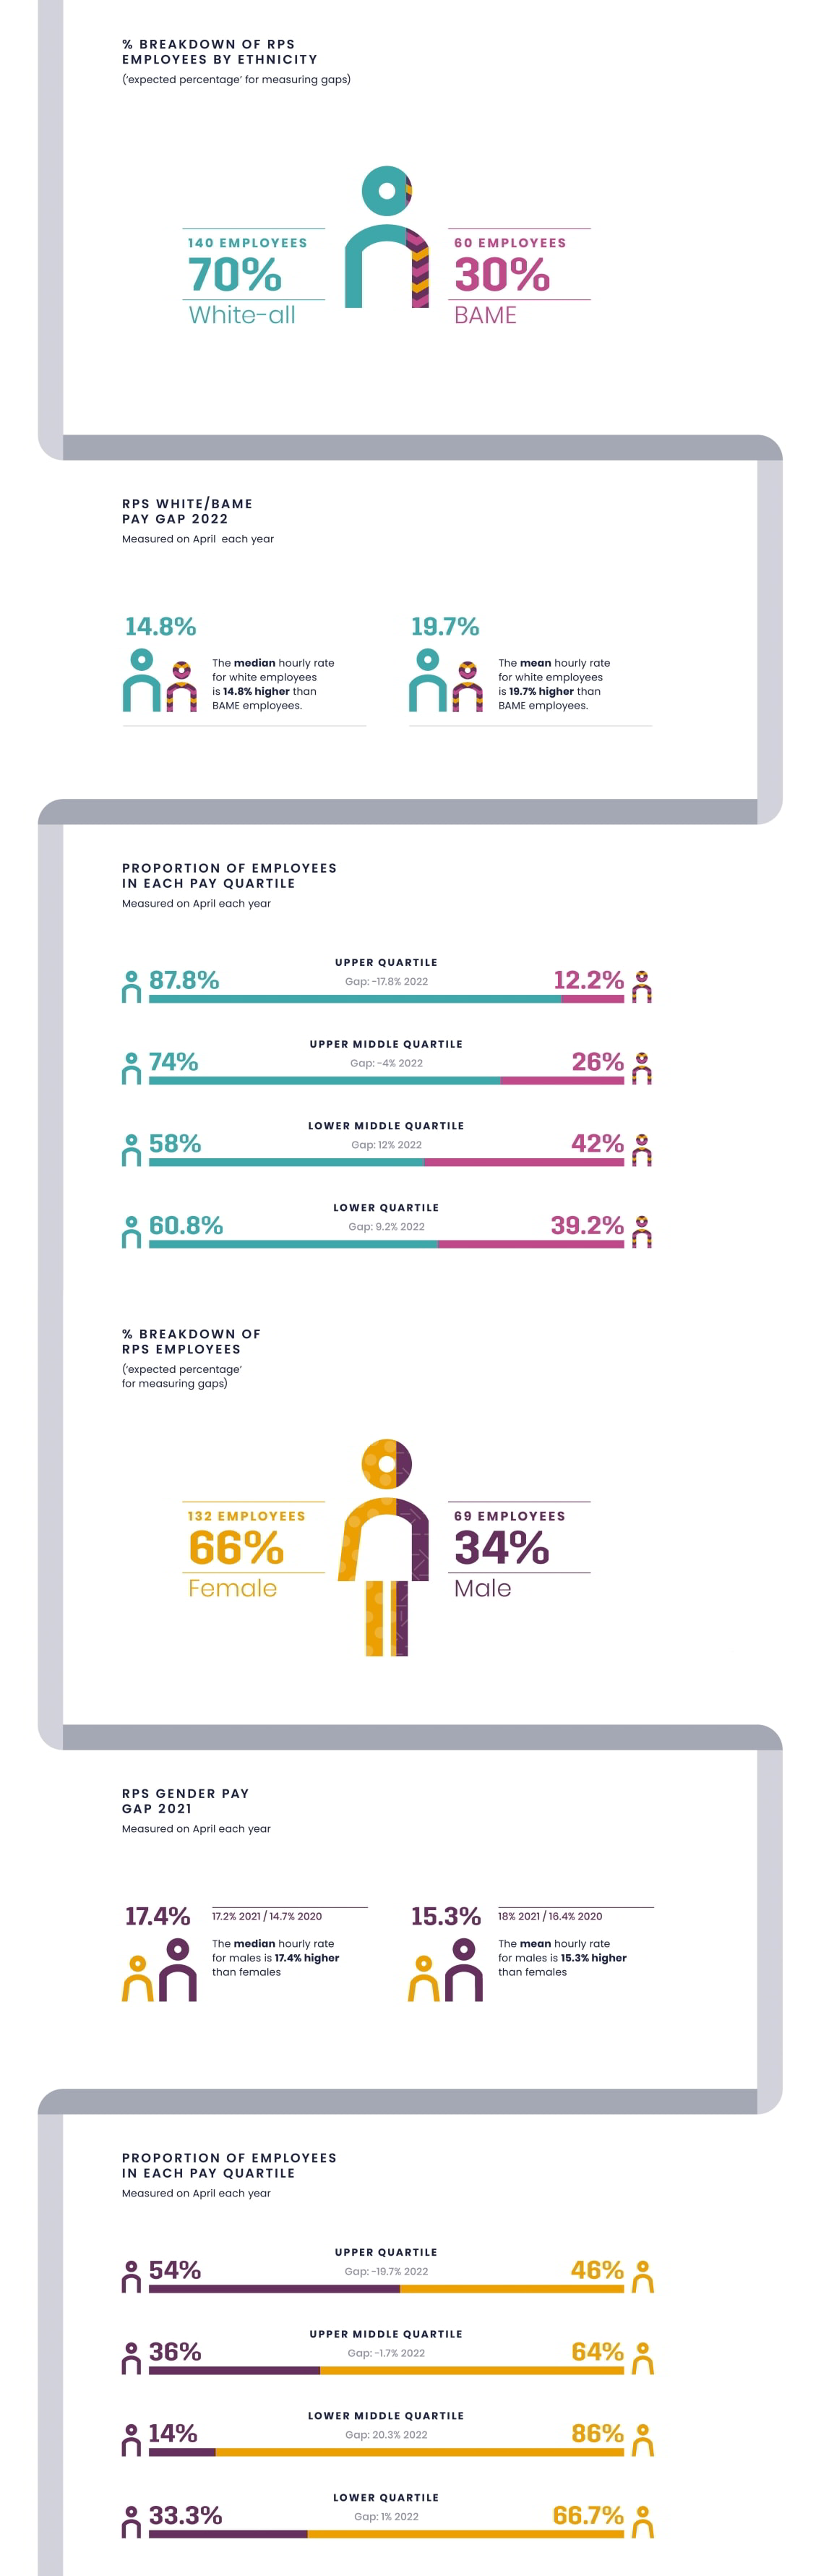 RPS Pay Gap 2022 infographic